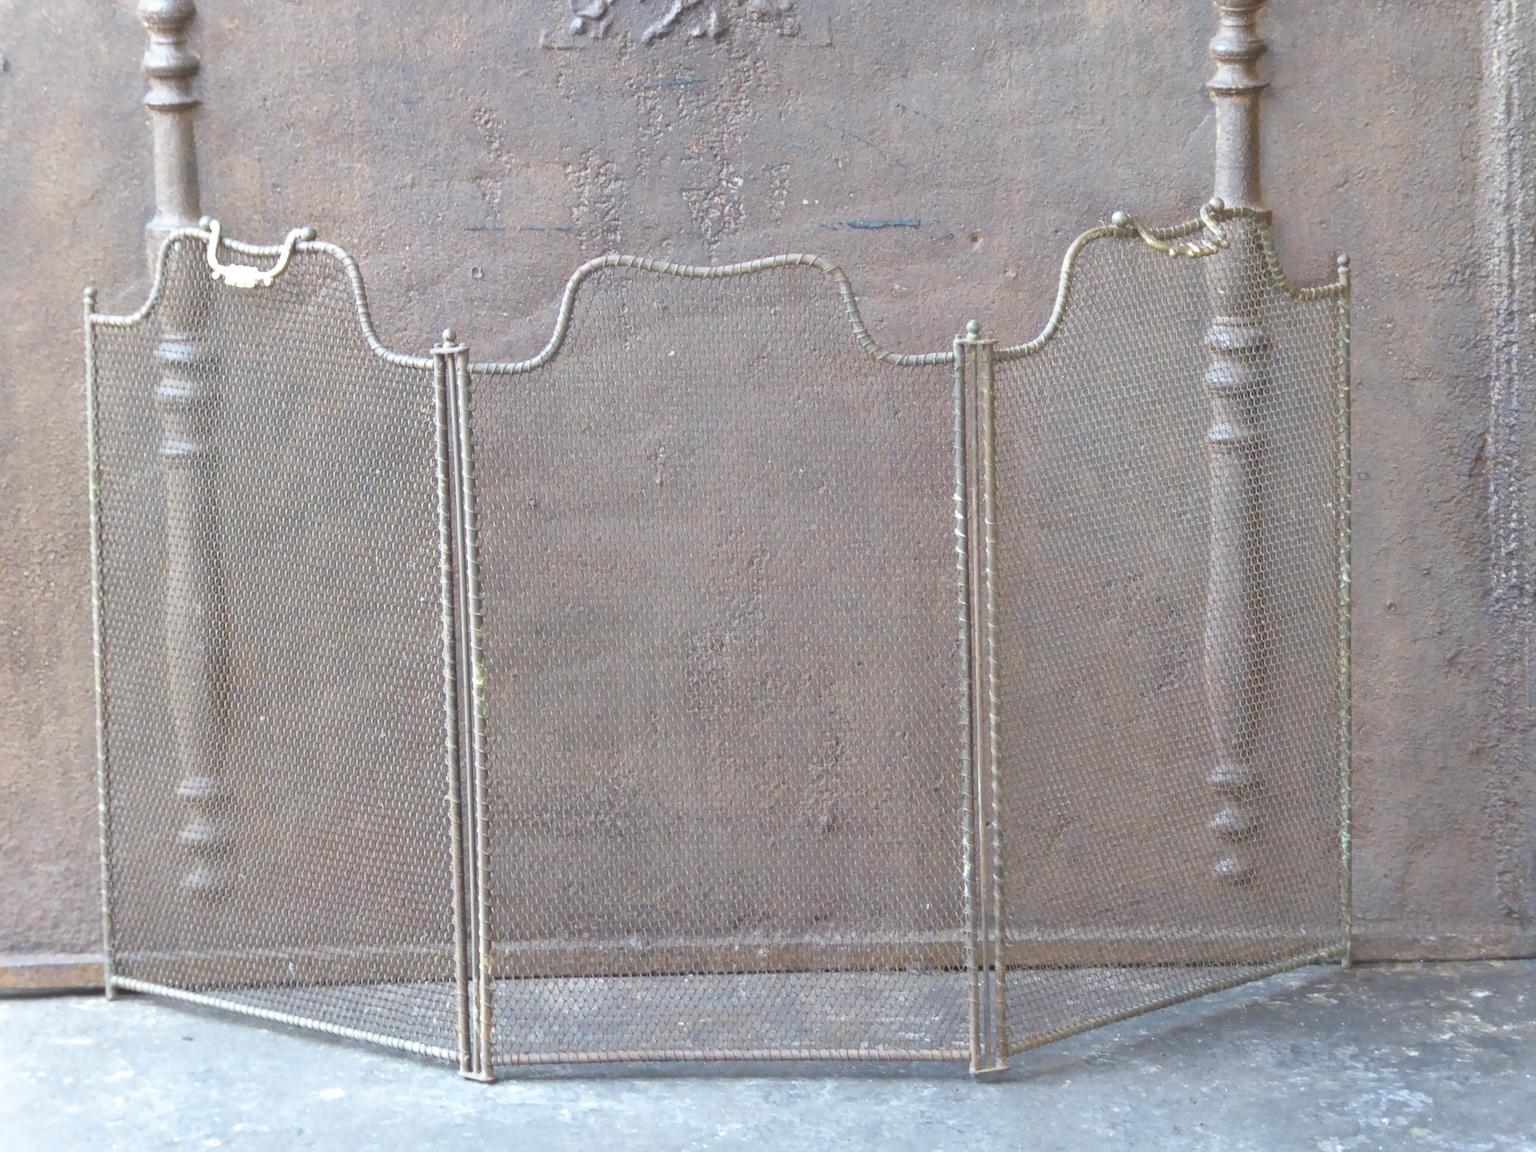 19th century French Napoleon III three panel fireplace screen. The screen is made of brass and iron mesh. It is in a good condition and is fit for use in front of the fireplace.